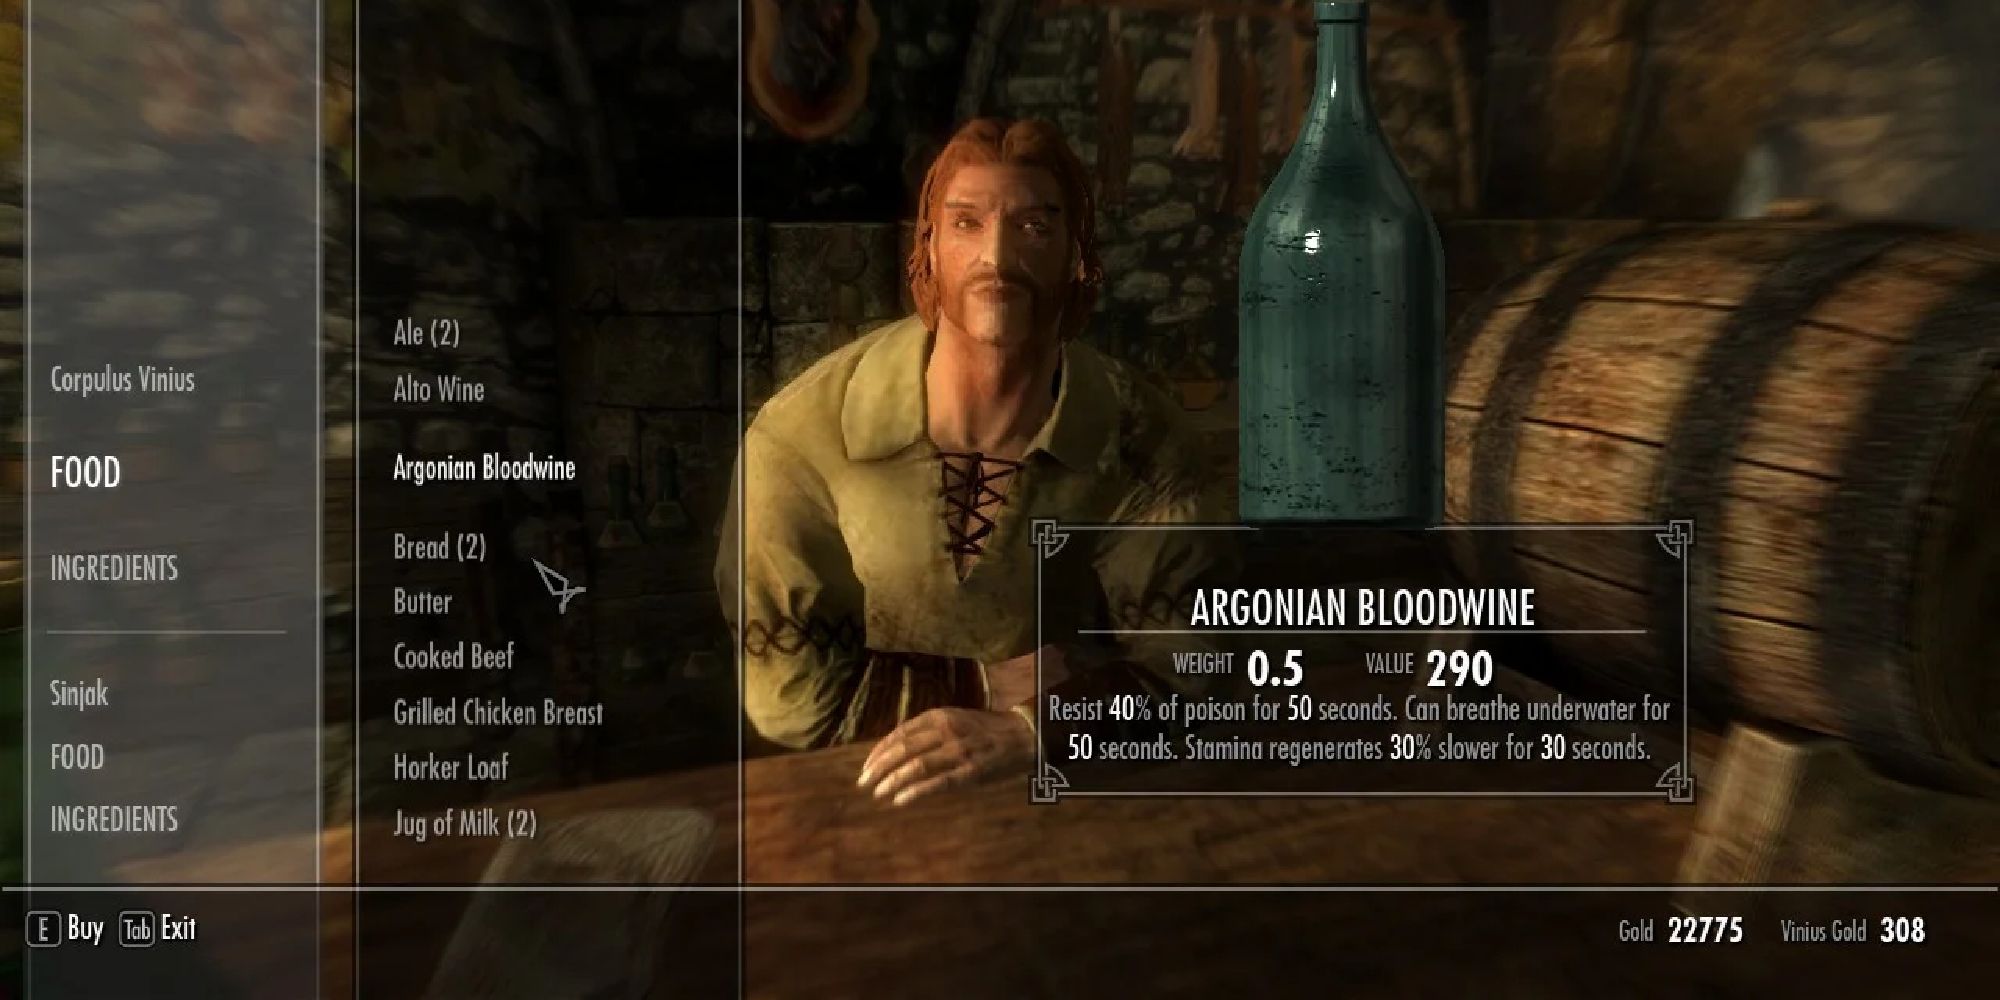 player buying argonian bloodwine from vendor